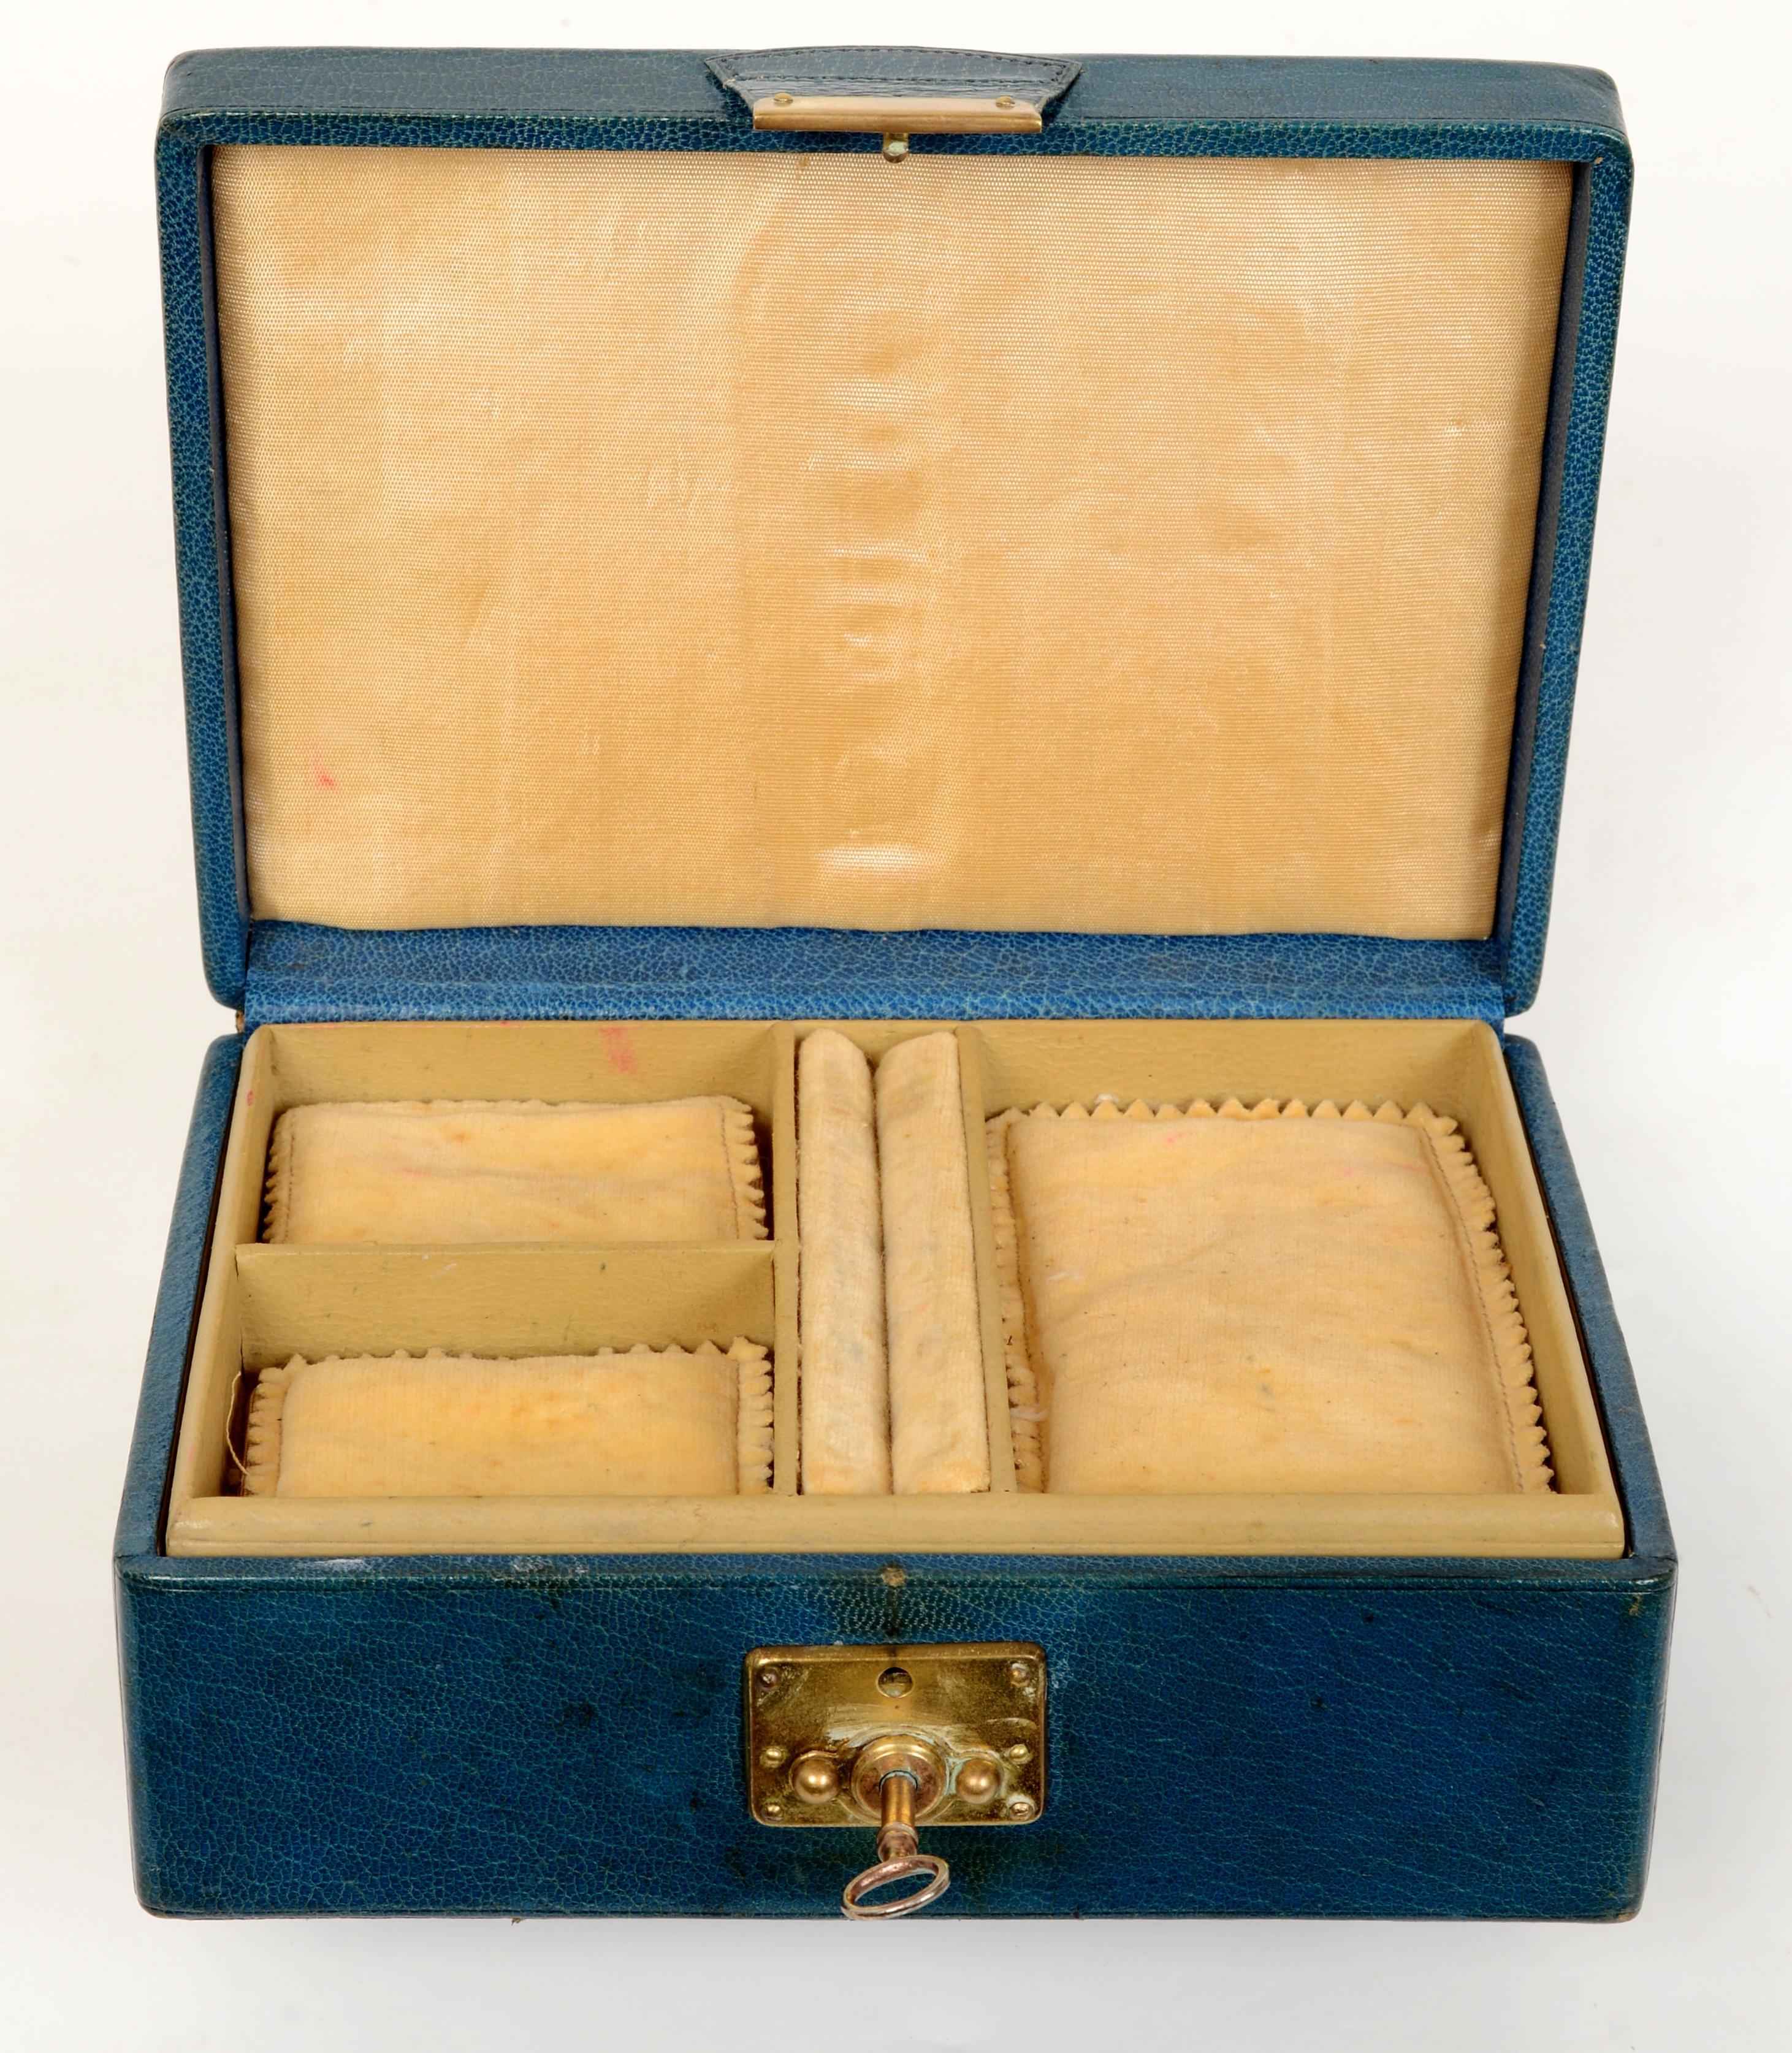 Abercrombie & Fitch New York, Vintage, Patinated Fine Smooth Blue Calf Leather Covered Locking Jewelry Box, c1950. The top has the original handle. The box has a suede lining and a removable tray. The tray has a place for rings and two suede lined